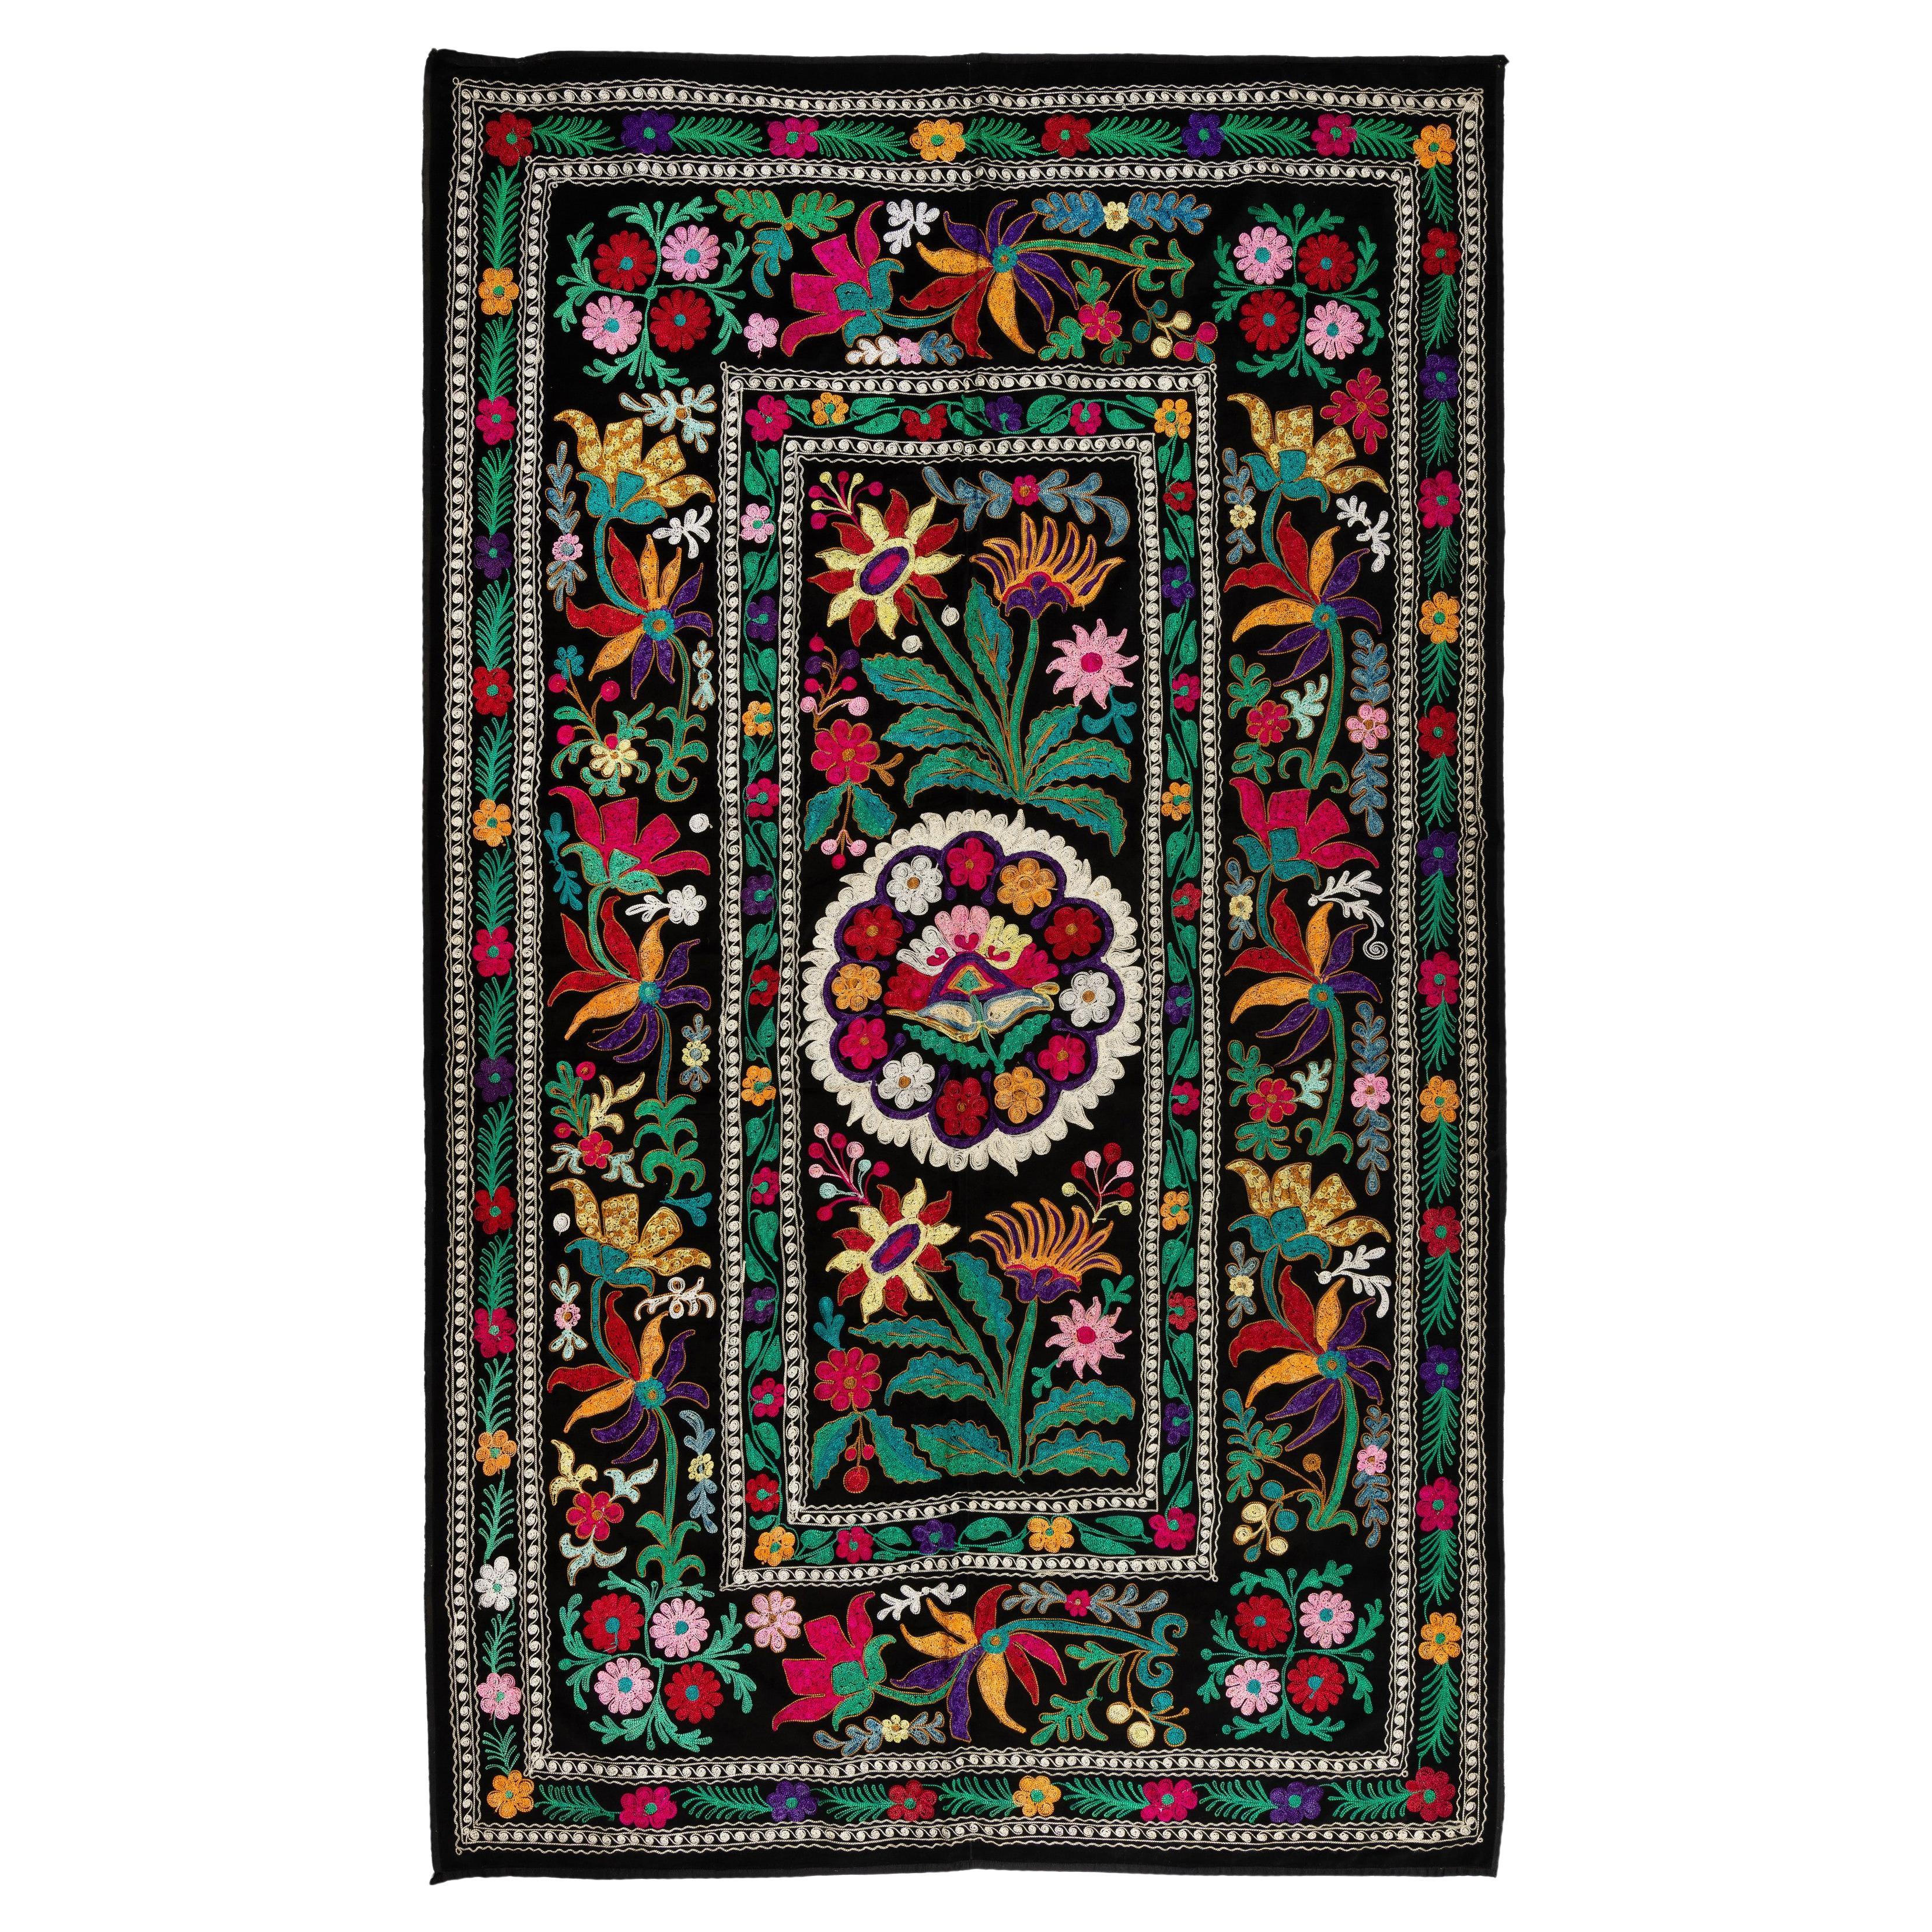 4.3x7.3 Ft Silk Embroidered Suzani Bed Cover, Vintage Colorful Wall Hanging